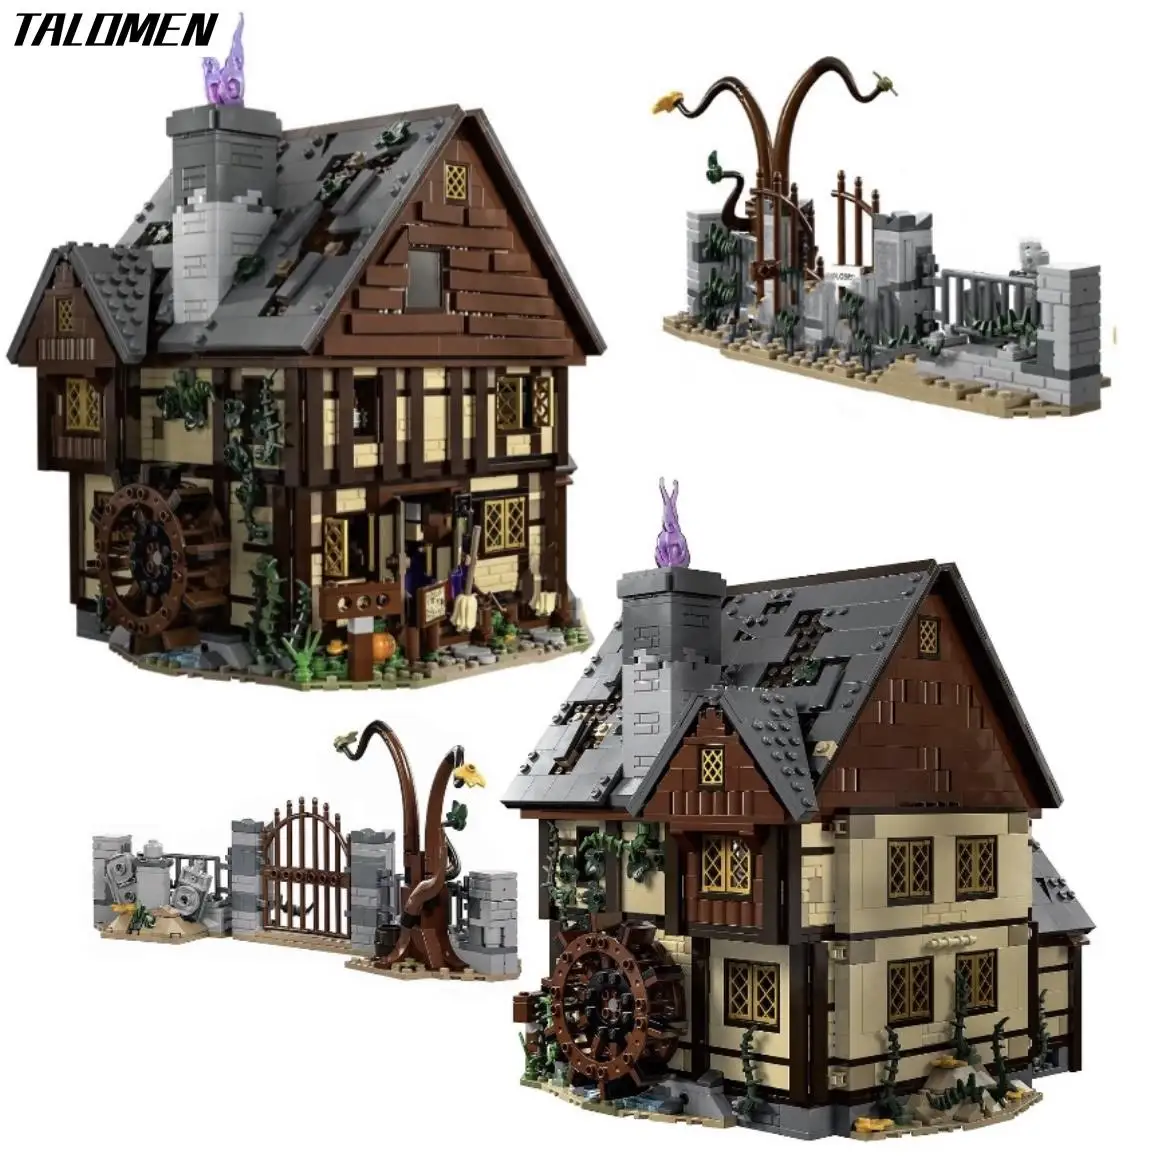 

IN STOCK Ideas 21341 Hocus Pocused The Sanderson Sisters Cottage Building Blocks Halloween Bricks Toys For Kids Christmas Gifts